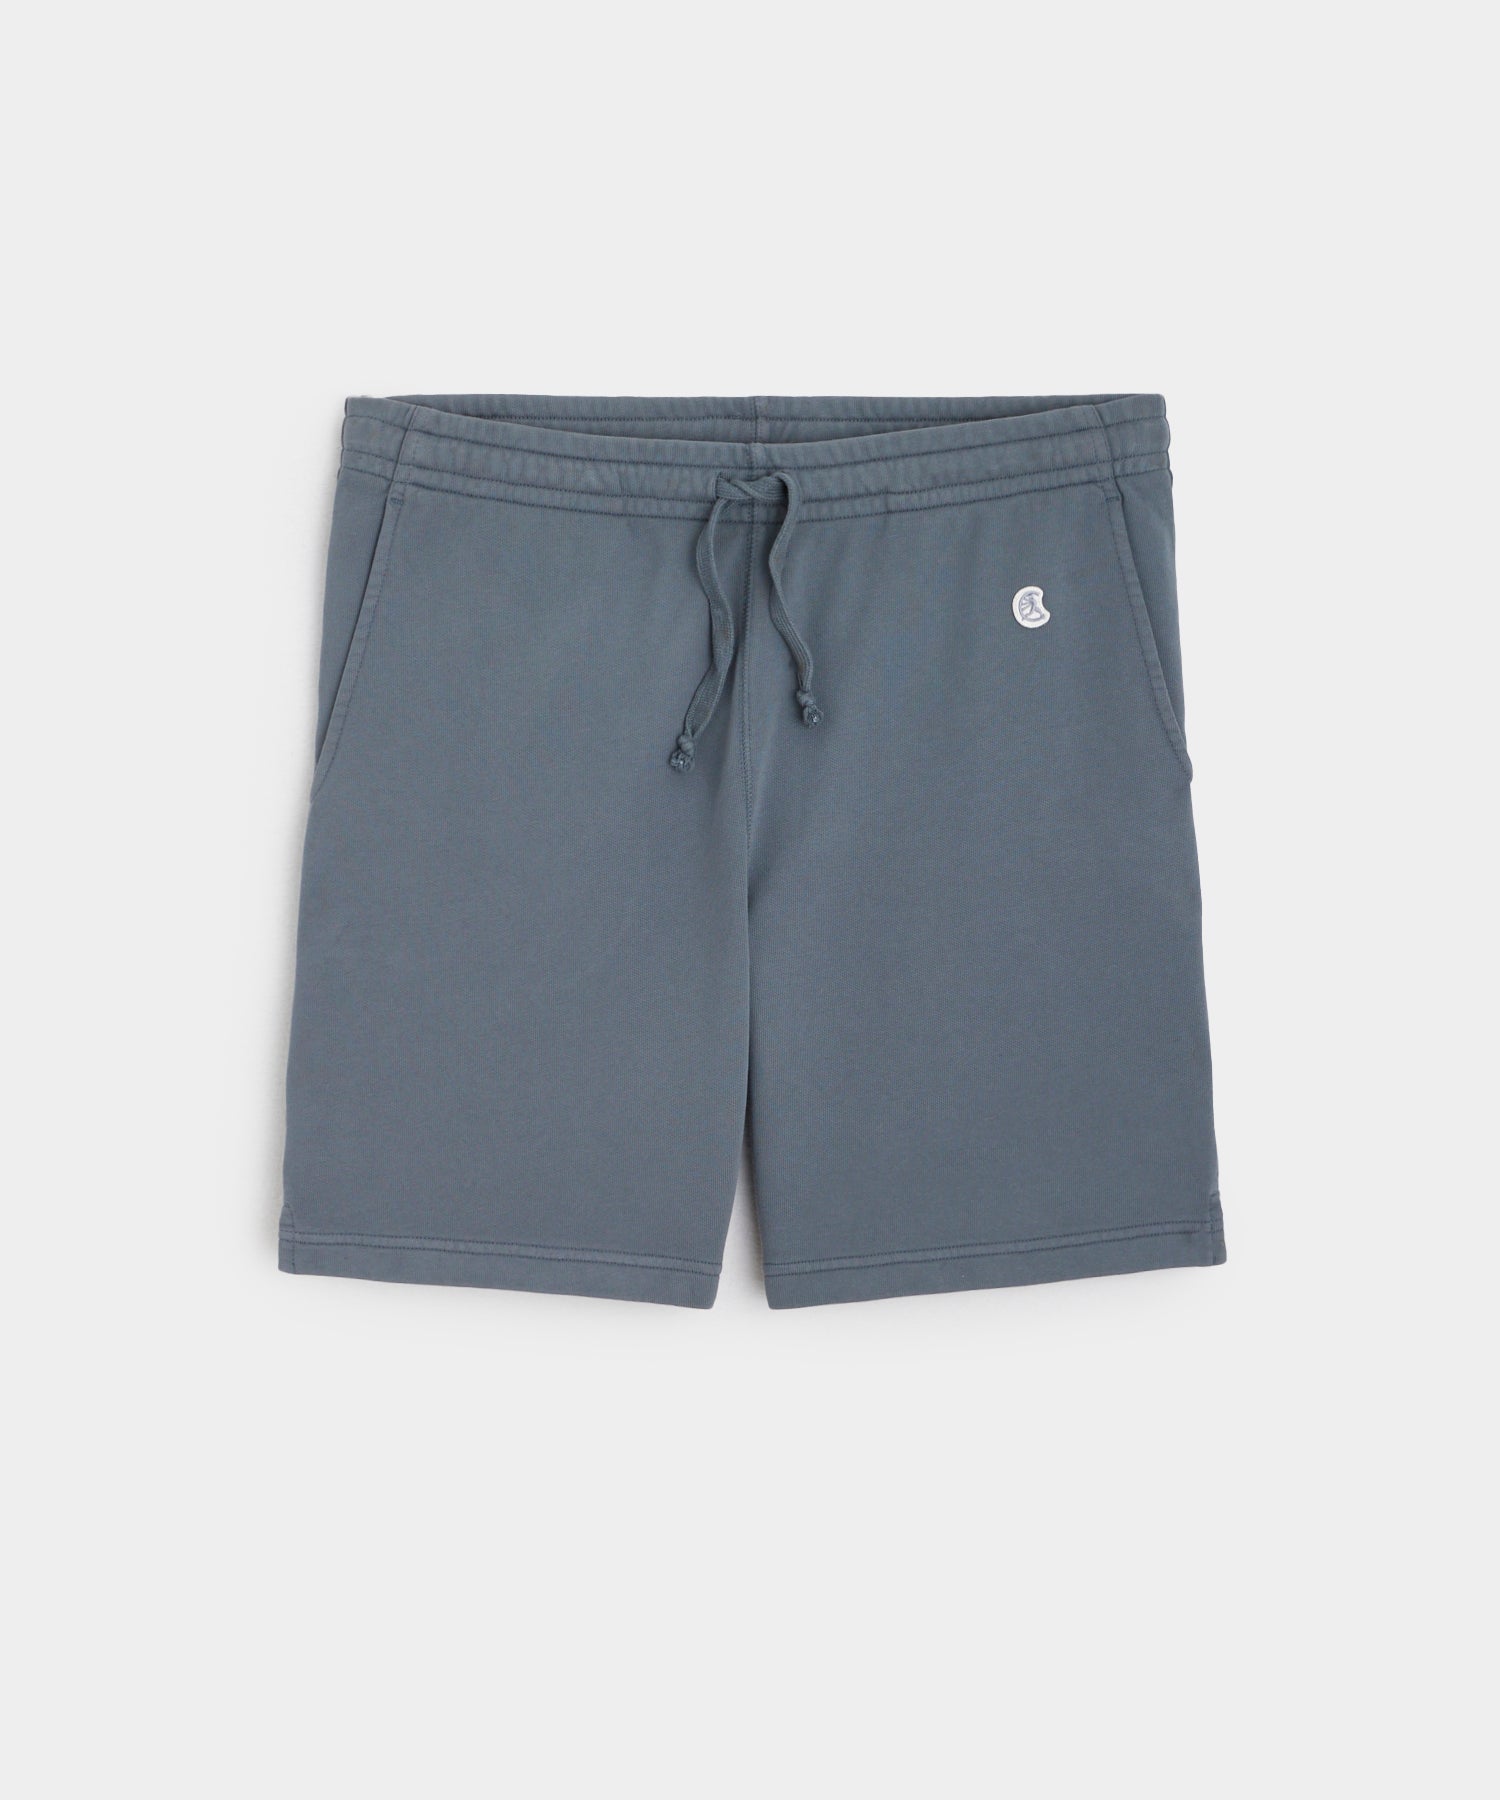 7" Midweight Warm Up Short in Blue Metal